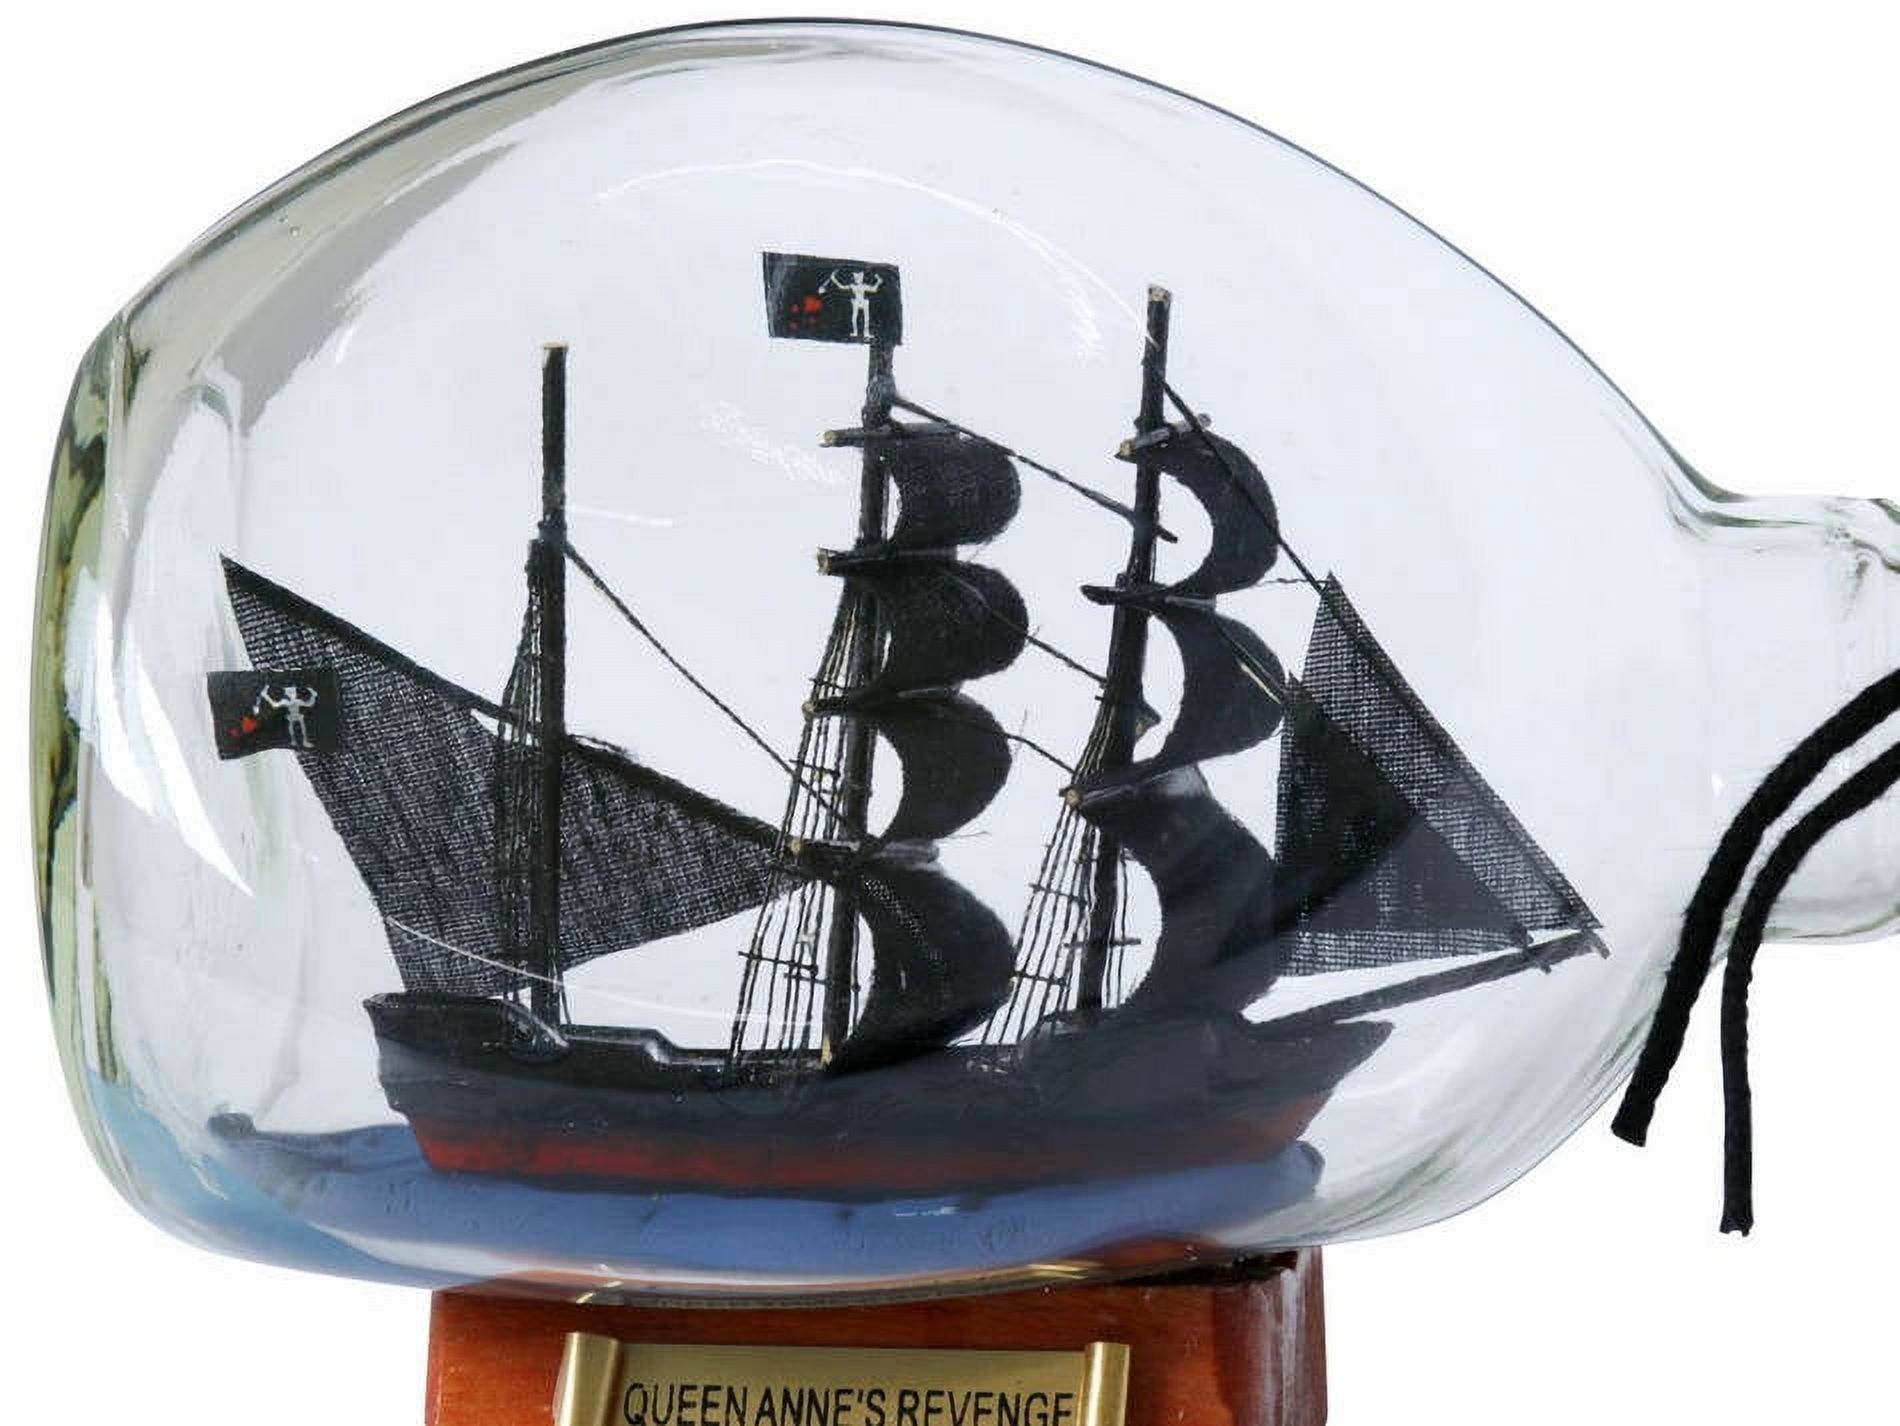 Handcrafted Model Ships  Blackbeards Queen Annes Revenge Pirate Ship in a Bottle 7 in. Ships In A Bottle Decorative Accent - image 3 of 3